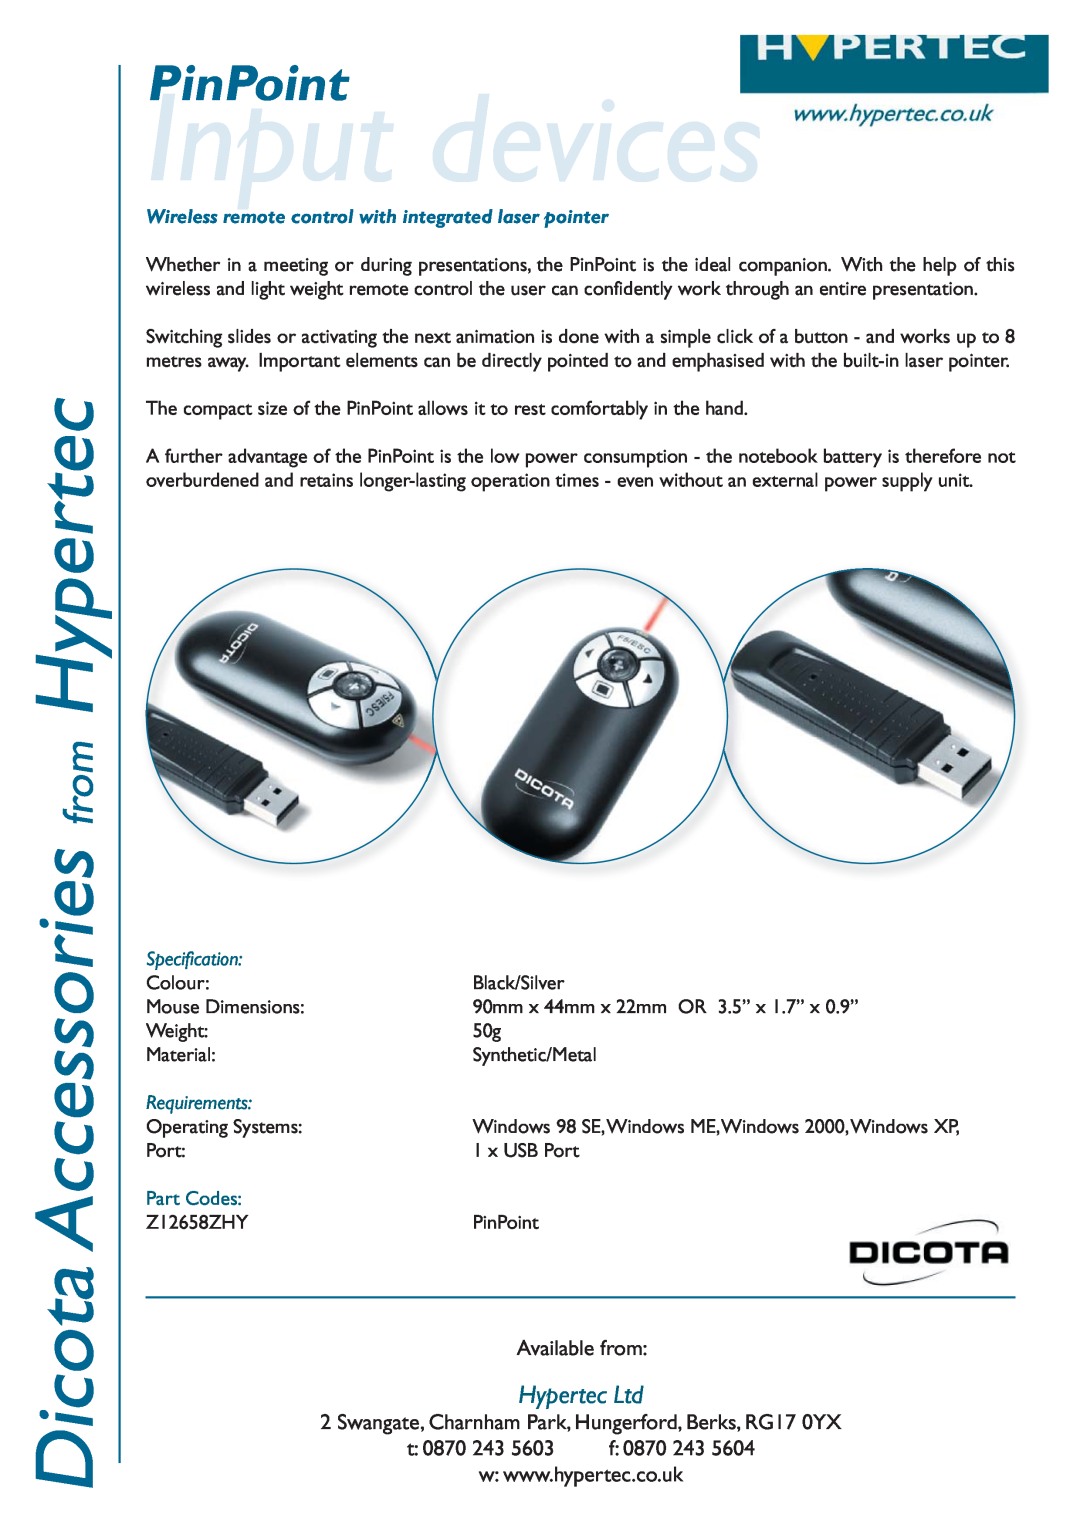 Hypertec Z12658ZHY dimensions Input devices, Dicota Accessories from Hypertec, PinPoint, Available from, t 0870 243 